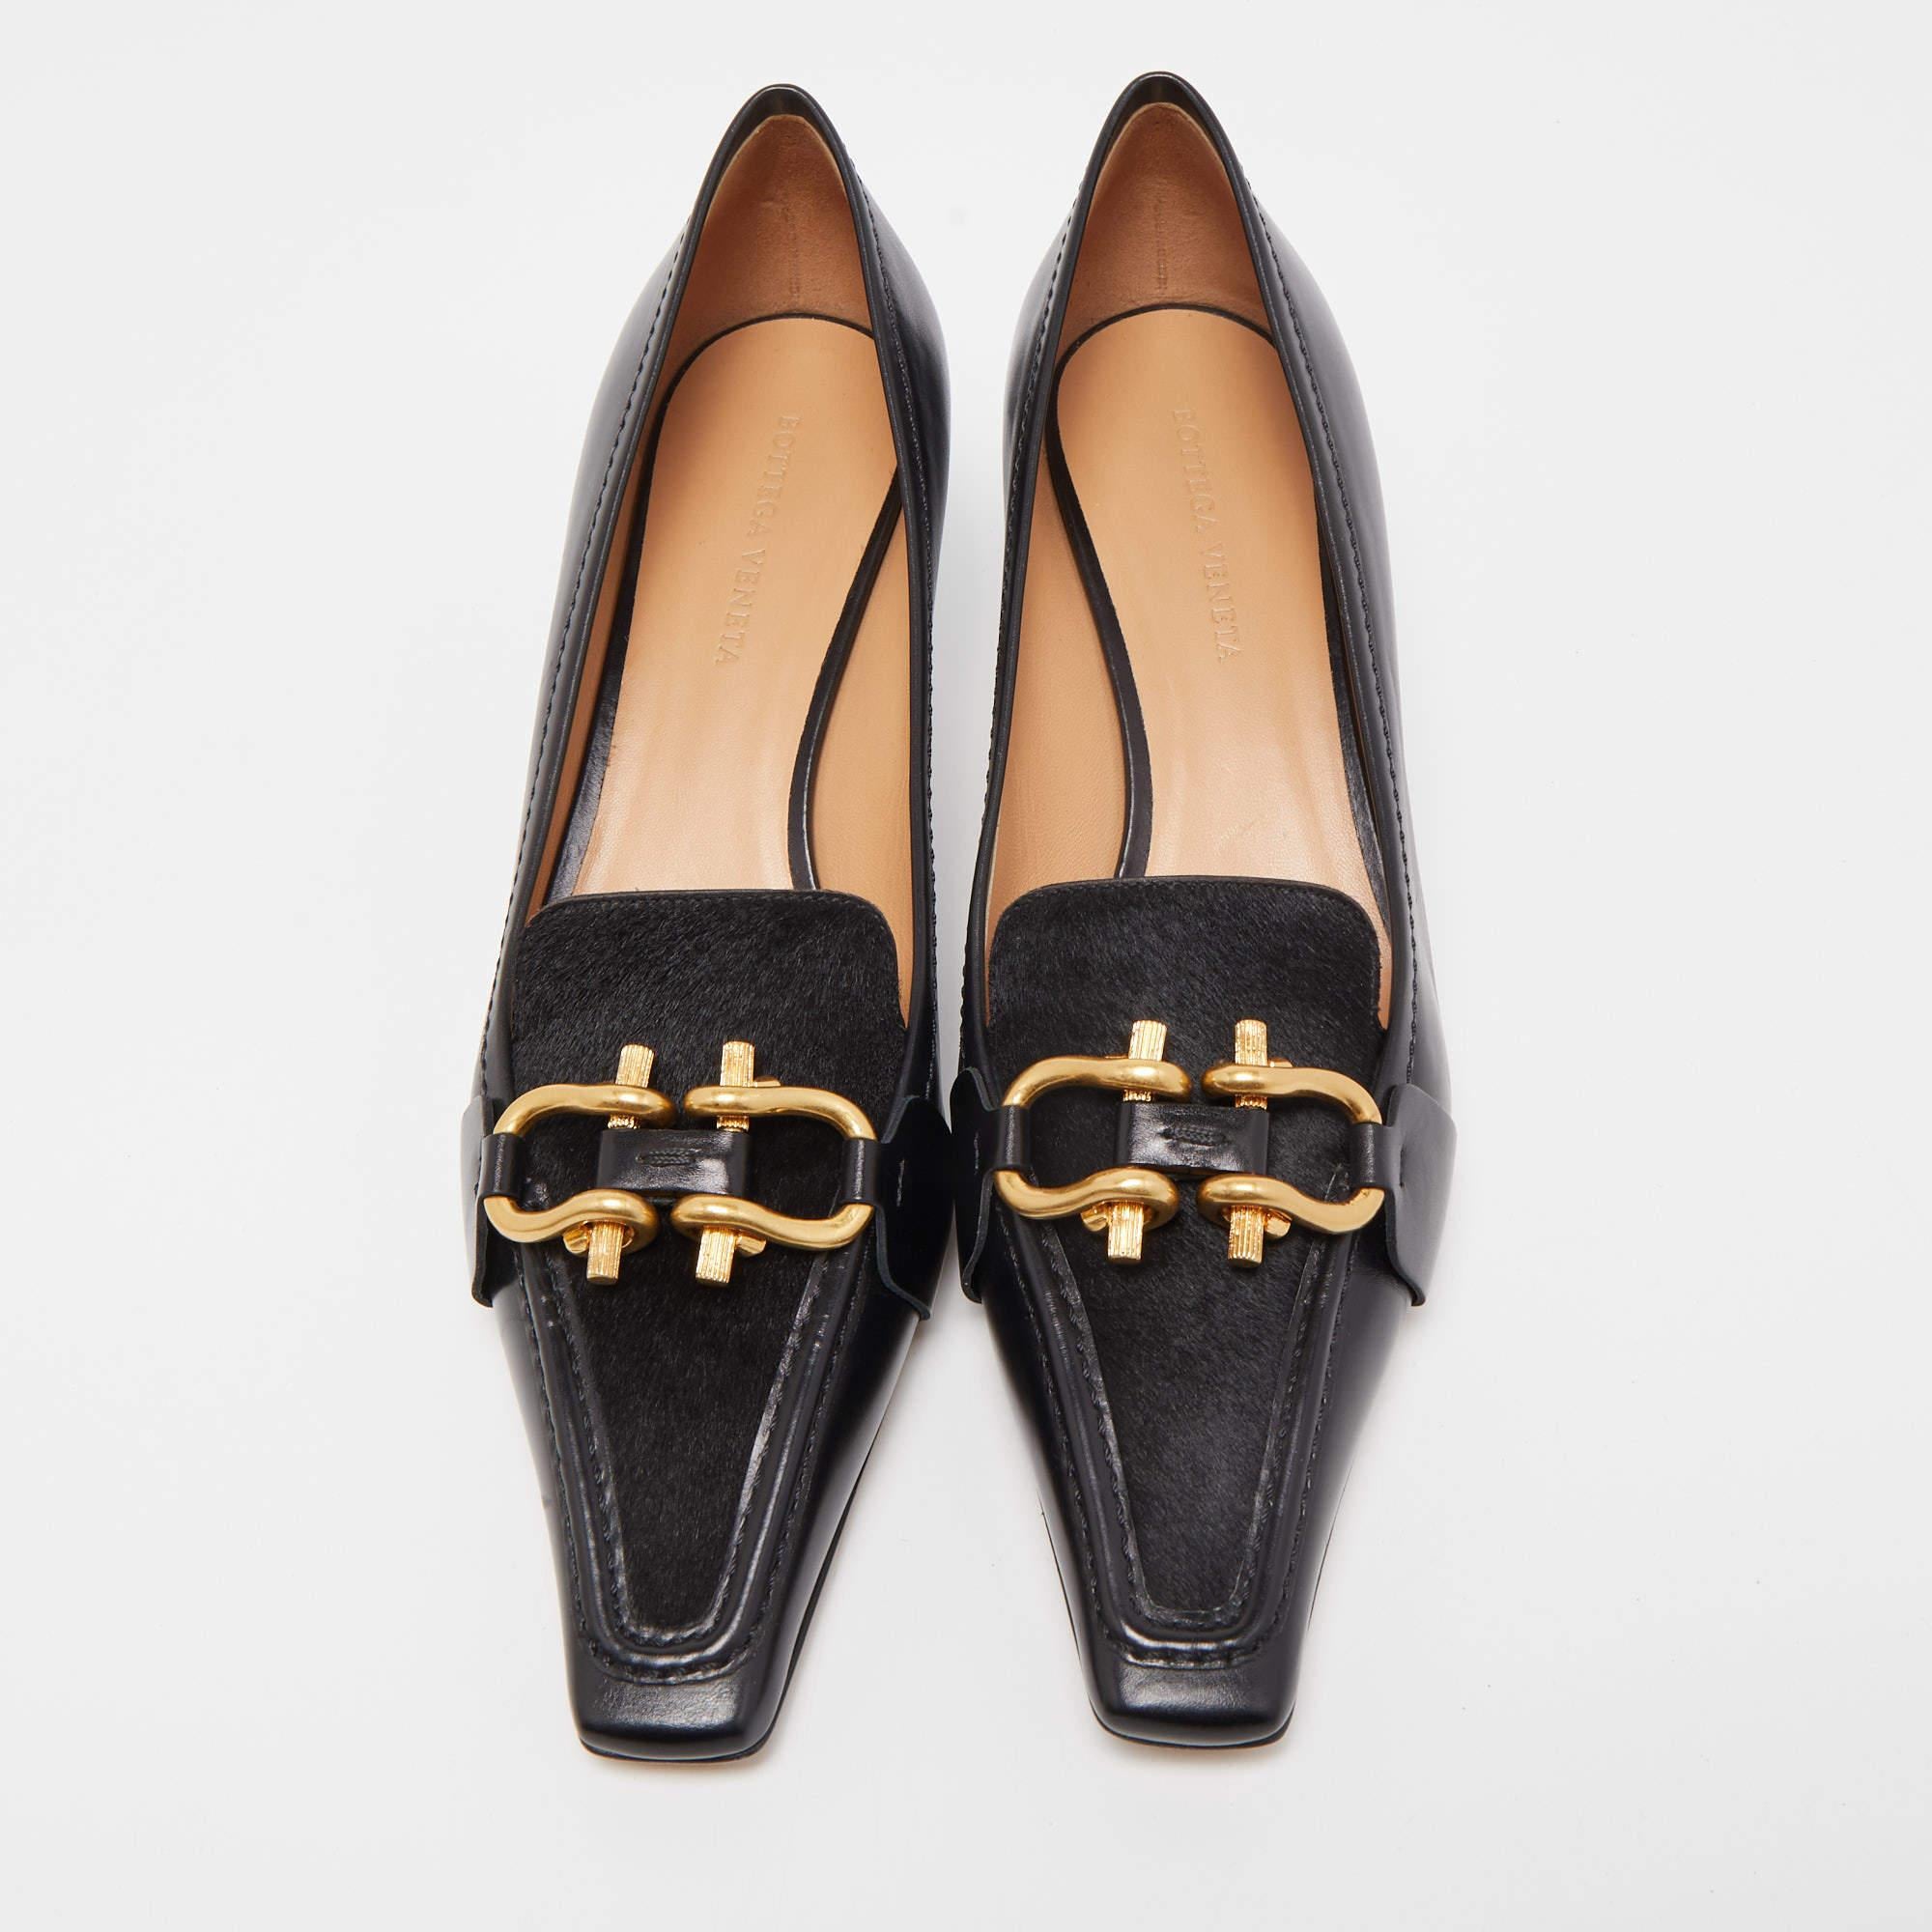 Covered using leather with gold-toned motifs accentuating the vamps, these Madame pumps are an everlasting style icon. The House of Bottega Venetta crafts these pumps in order to add elegance to your everyday attire. Pointed-toes and heels are